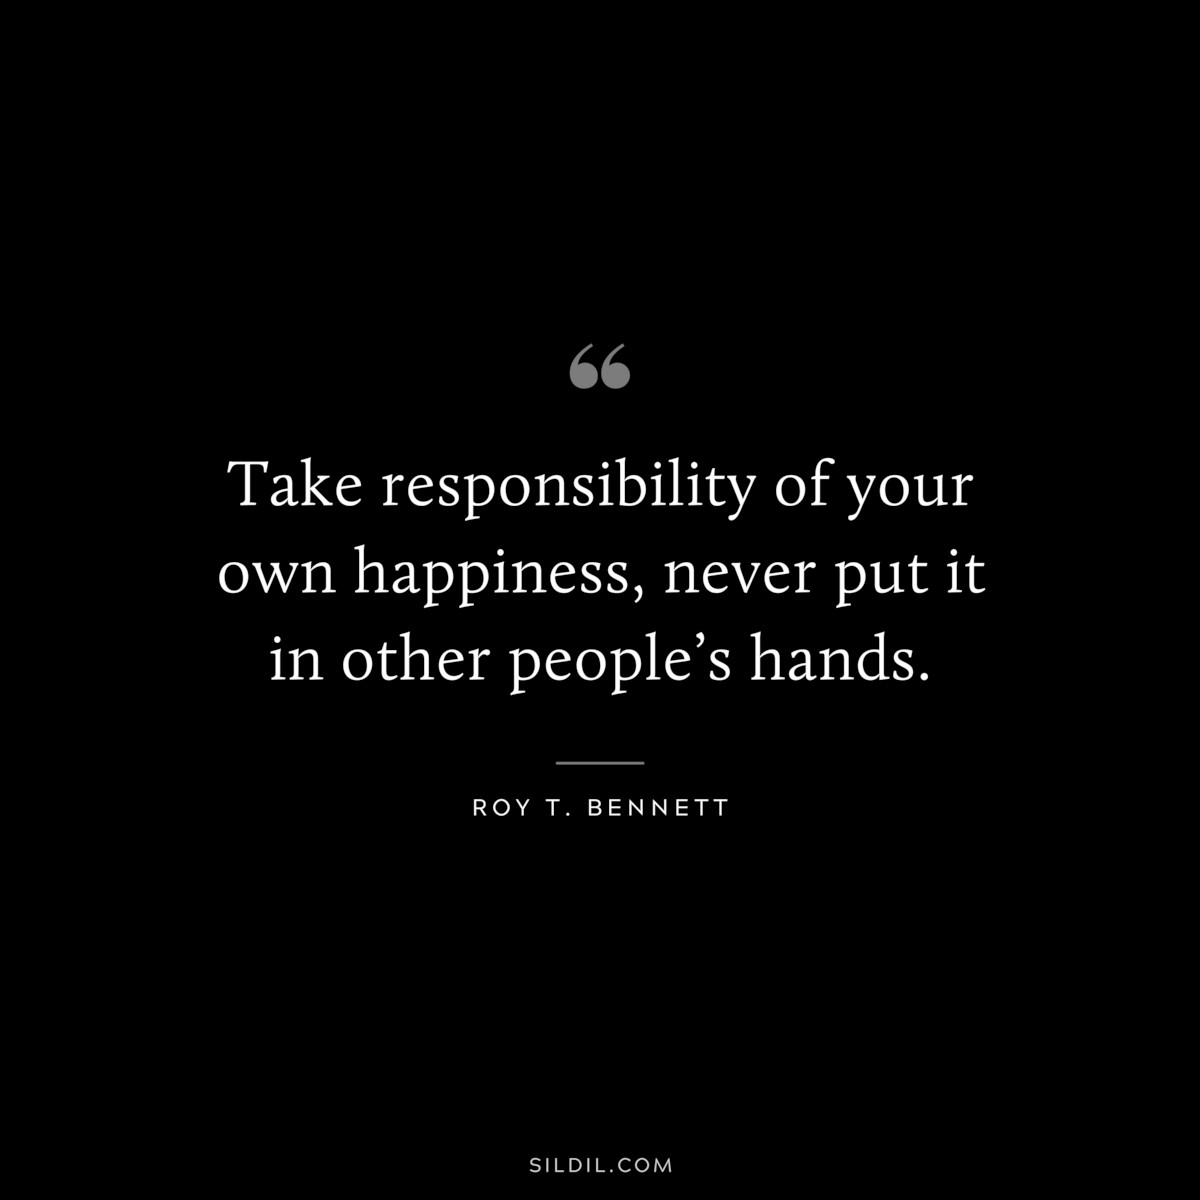 Take responsibility of your own happiness, never put it in other people’s hands. ― Roy T. Bennett